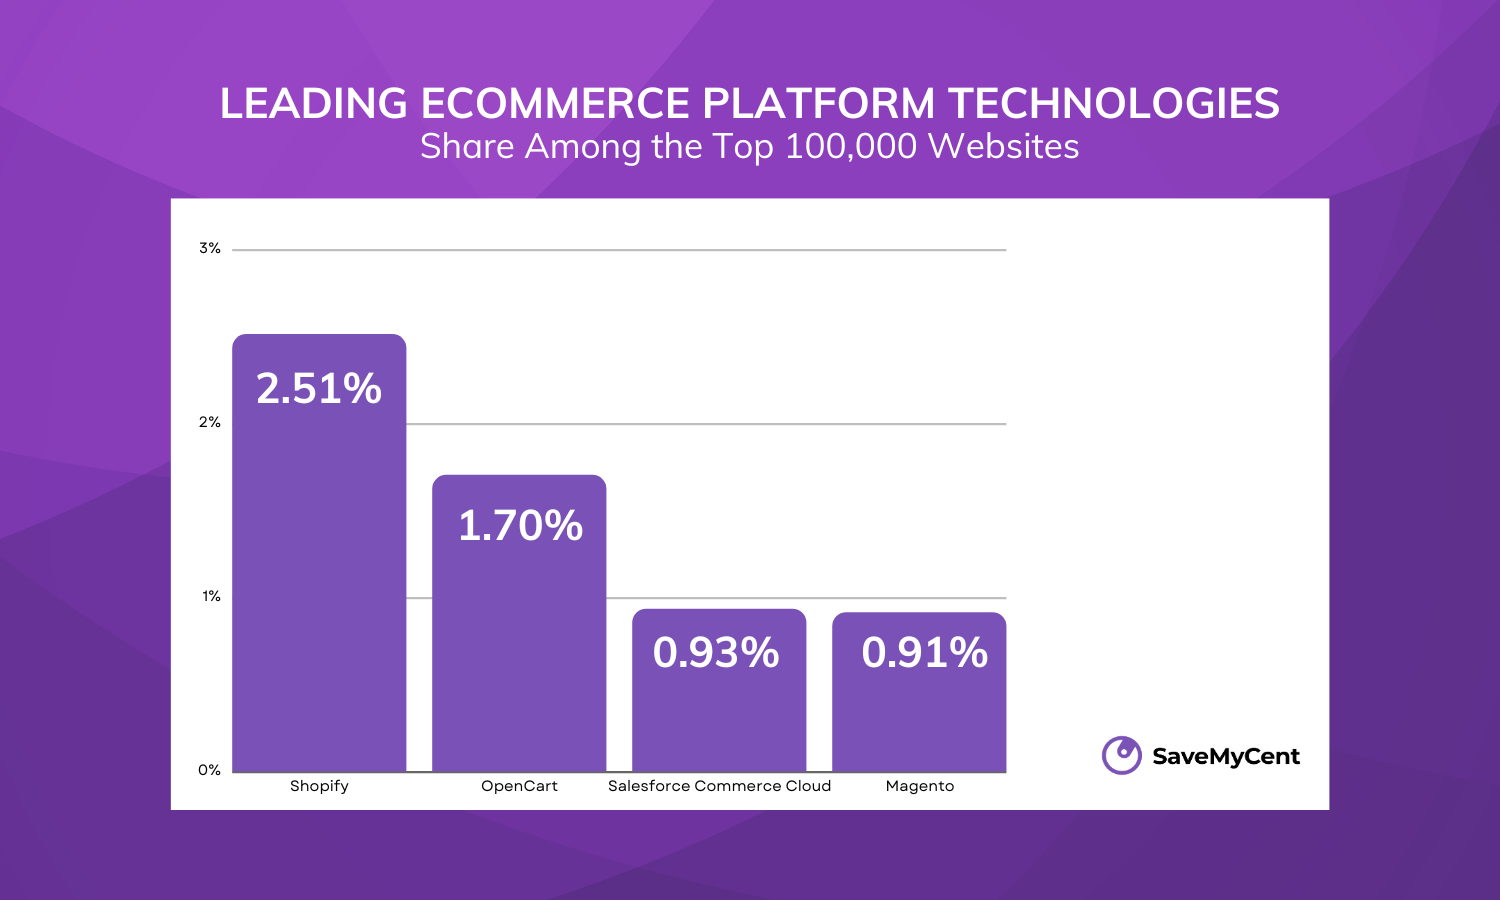 Based on Magento statistics, Shopify is the top e-commerce platform